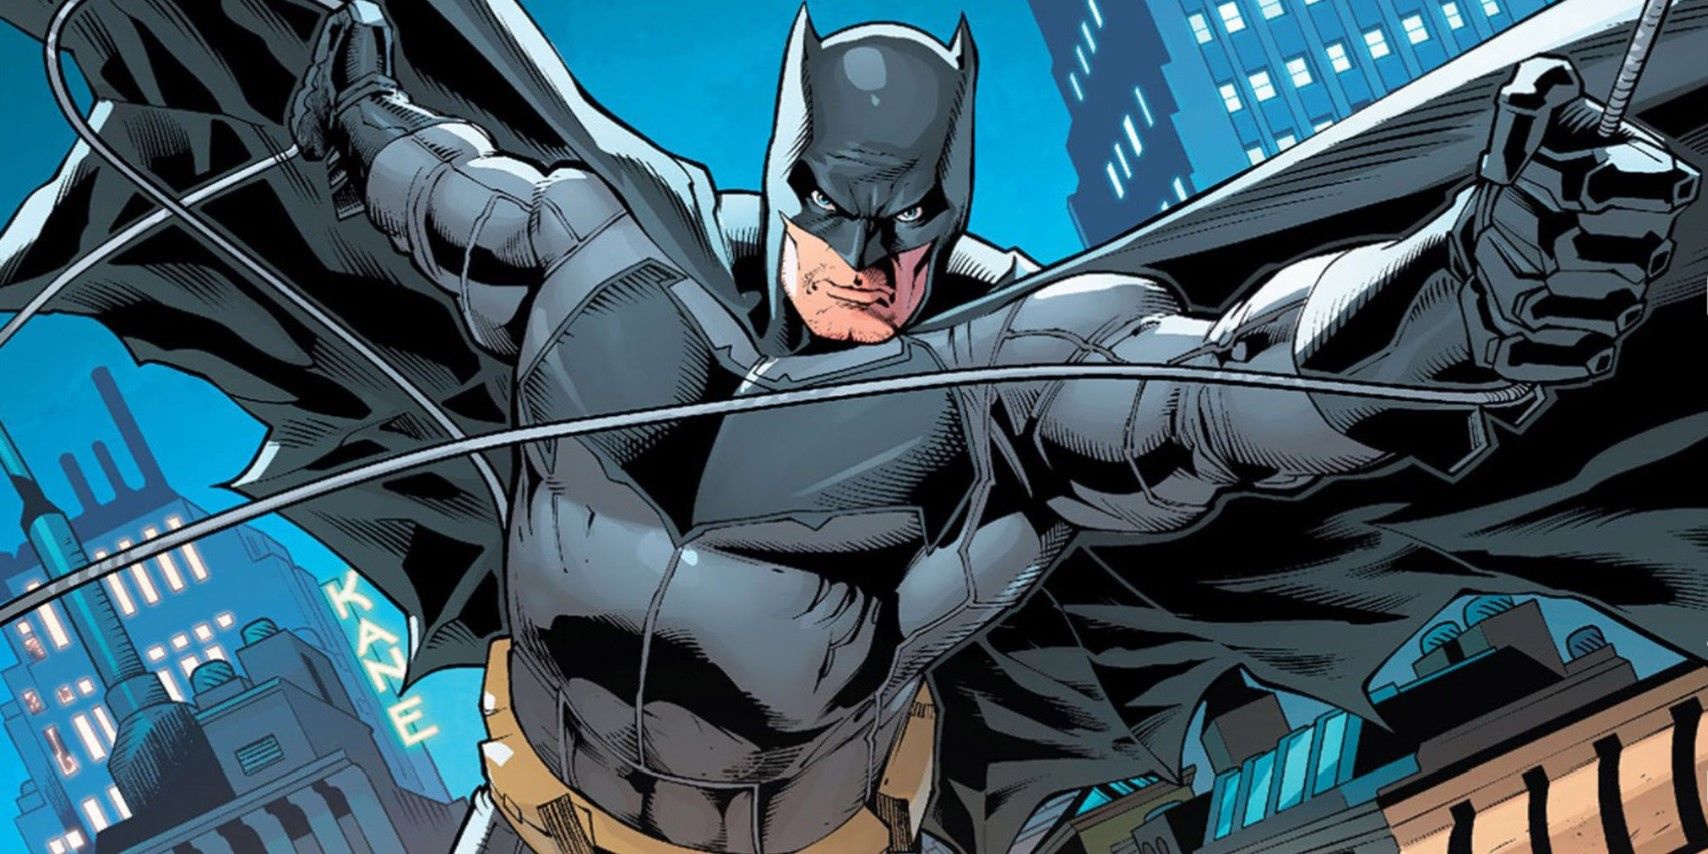 DCEU comic book version of Batman swinging on a cable